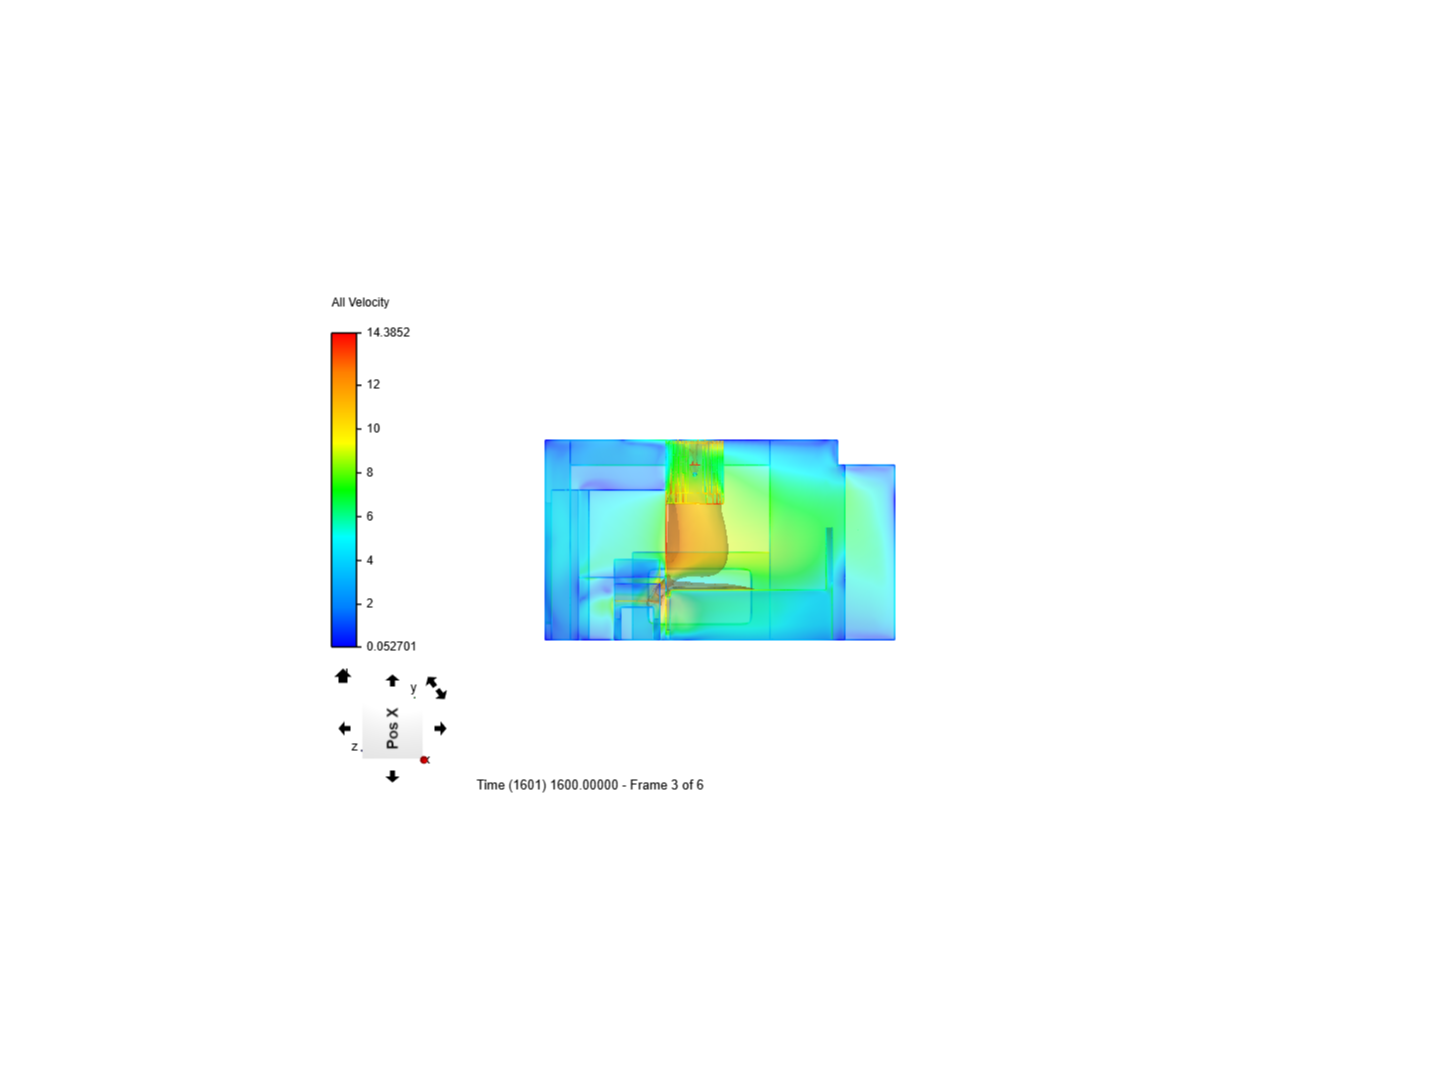 Airflow analysis of a ceiling fan in a living room image